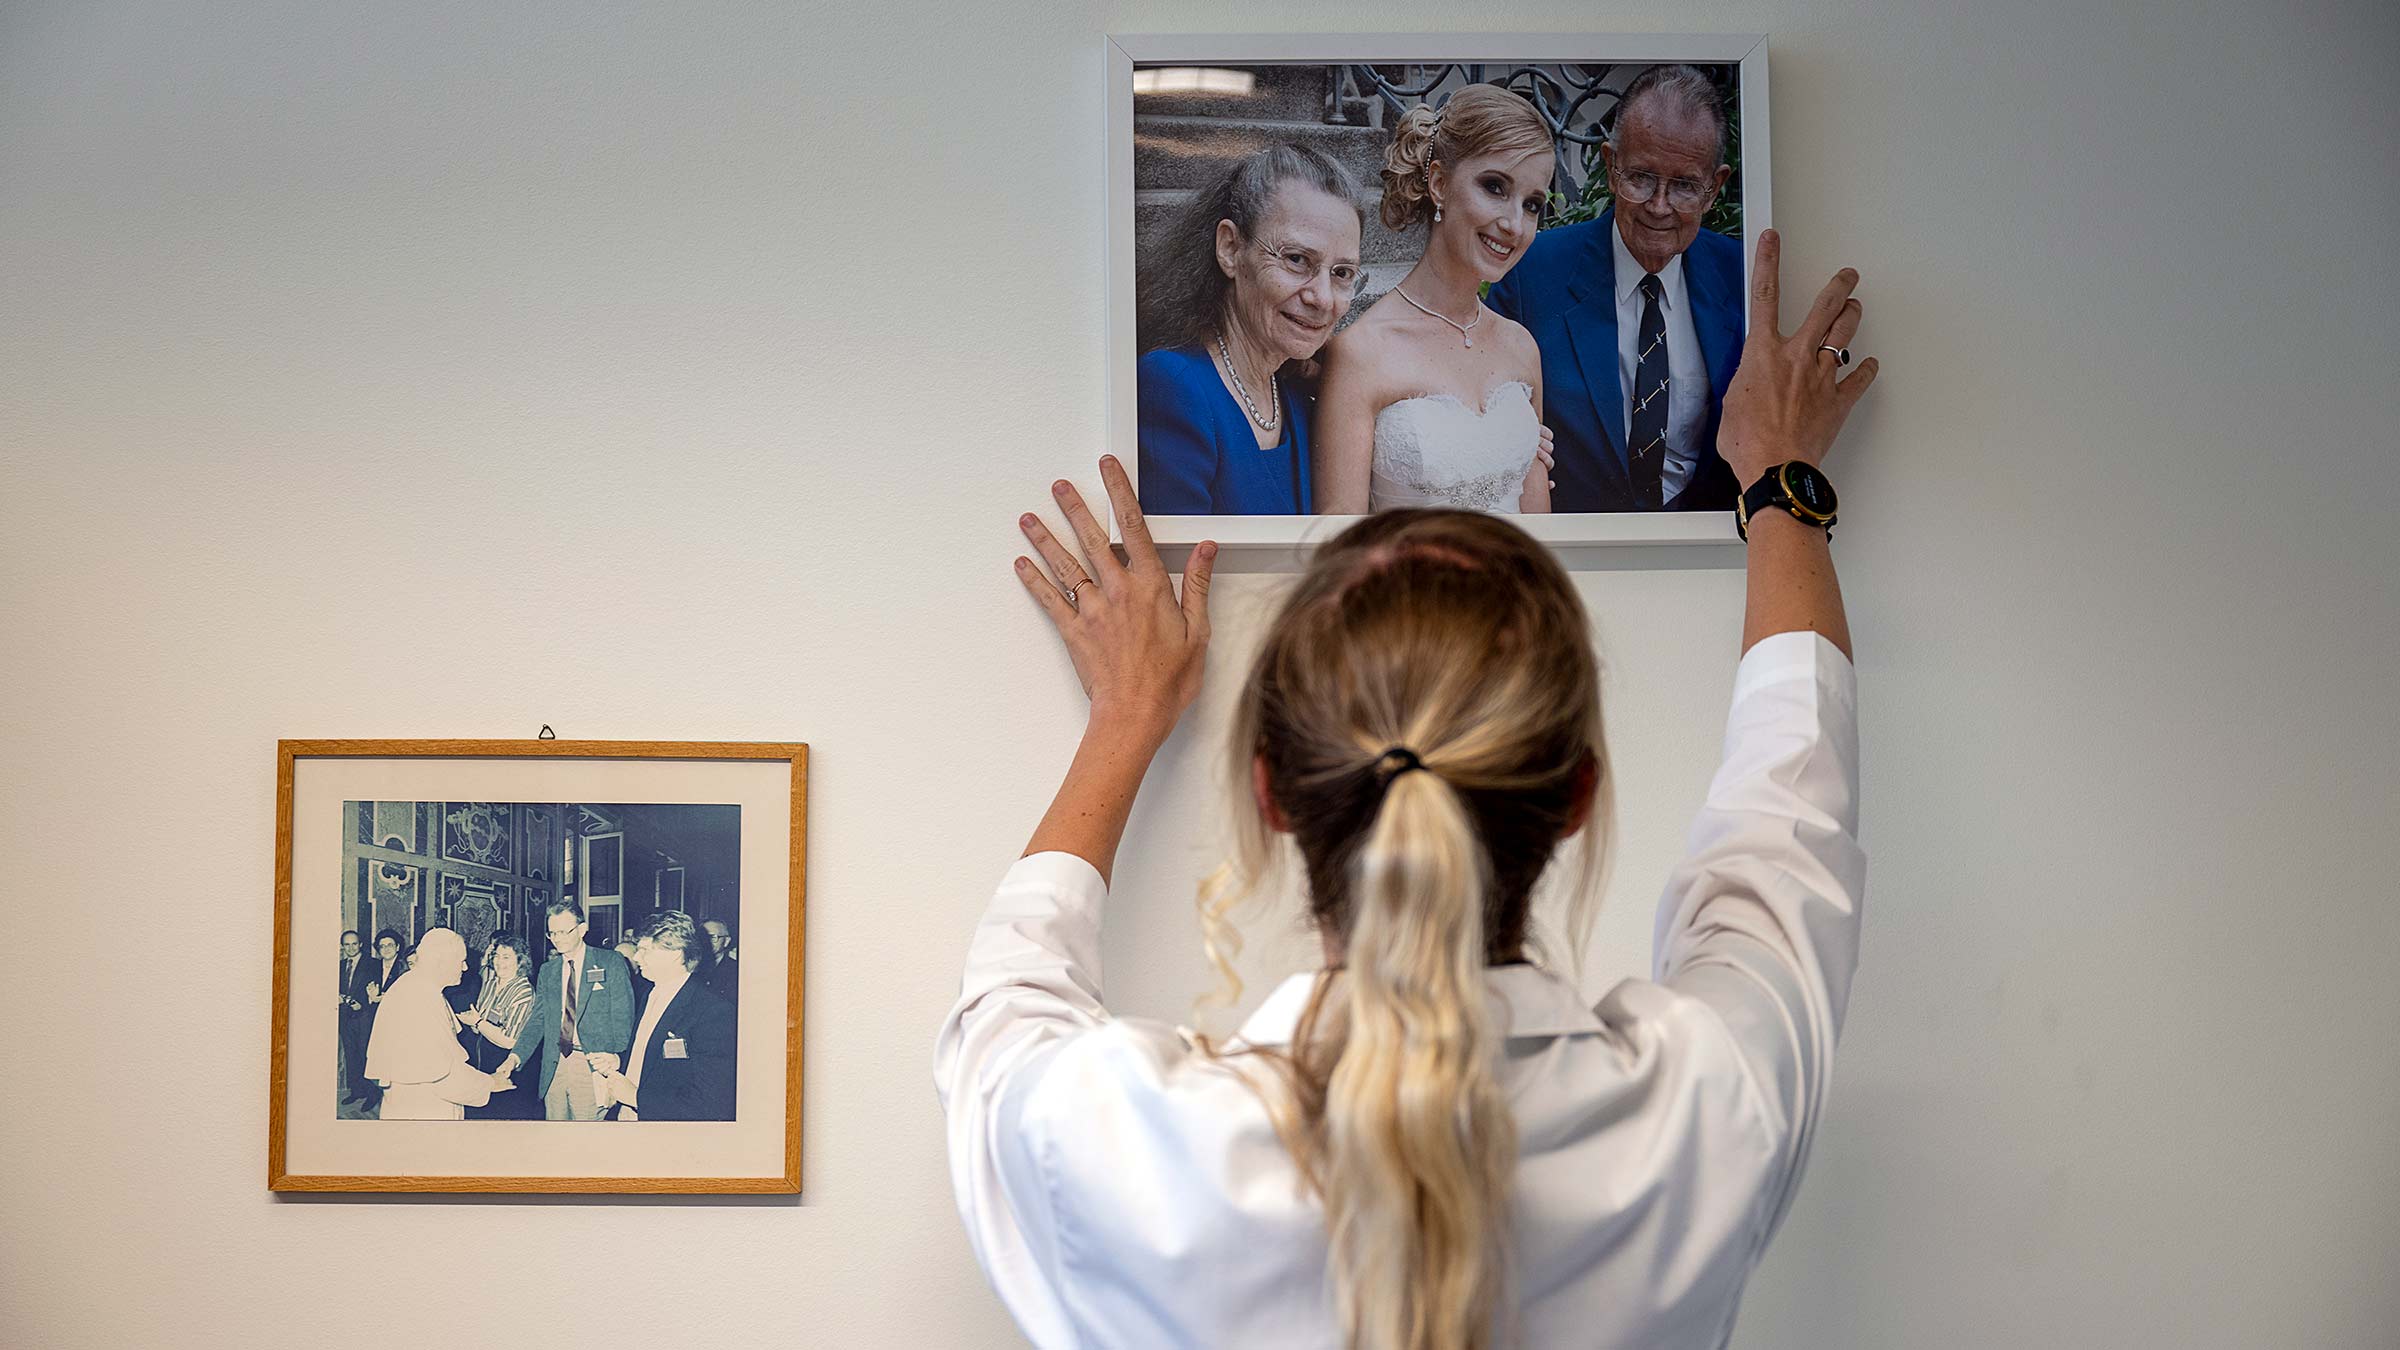 Ann-Kathrin Eisfeld is adjusting a photo on the wall picturing her and her mentors at her wedding